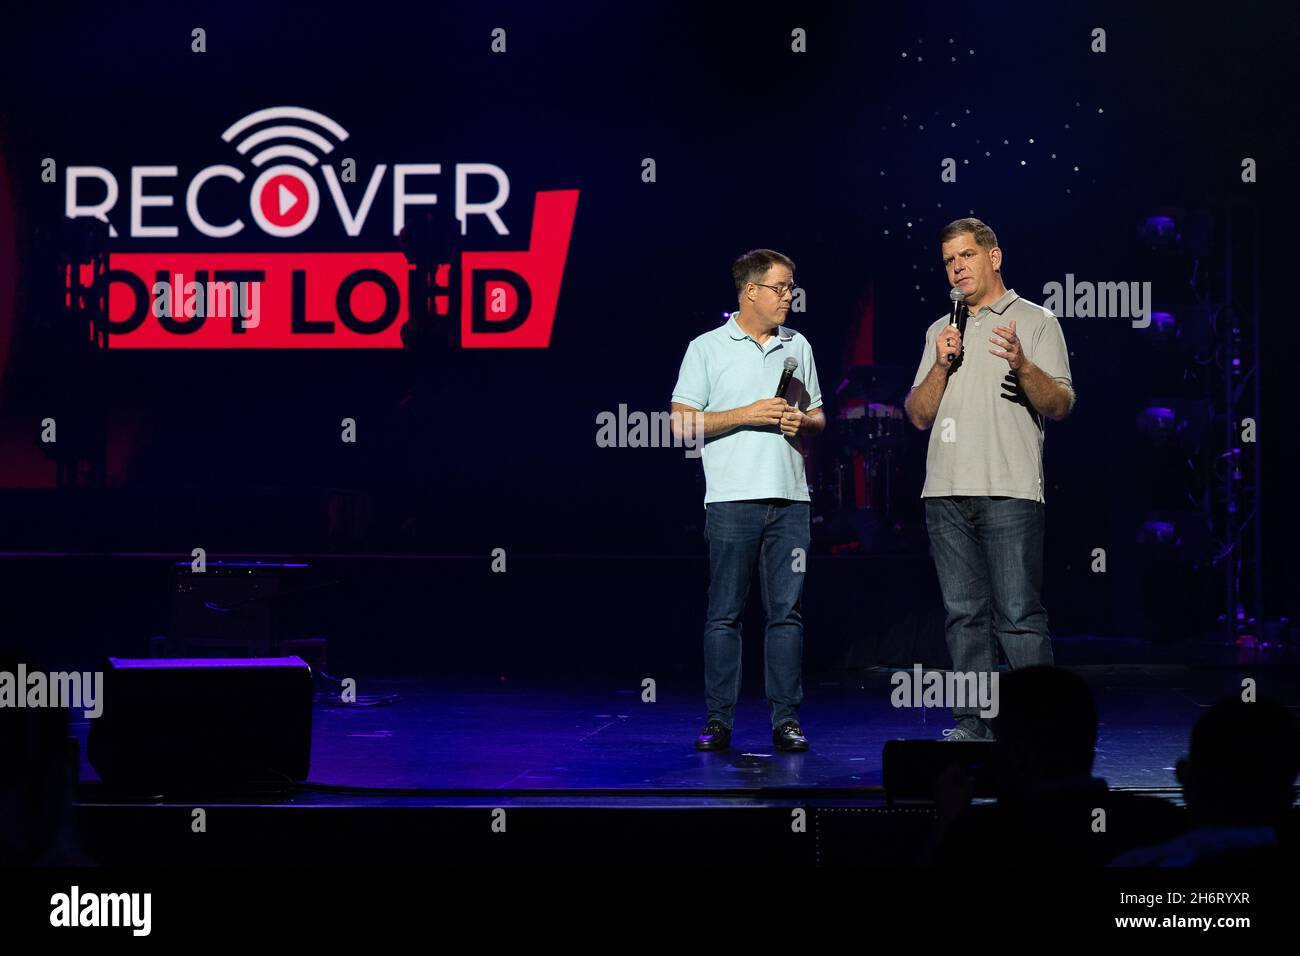 Washington, United States of America. 28 September, 2021. U.S Secretary of Labor Marty Walsh, right, delivers remarks onstage with Ryan Hampton at the Recovery Out Loud Concert during the Mobilize Recovery Conference September 28, 2021 in Las Vegas, Nevada.   Credit: Shawn T Moore/Dept of Labor/Alamy Live News Stock Photo